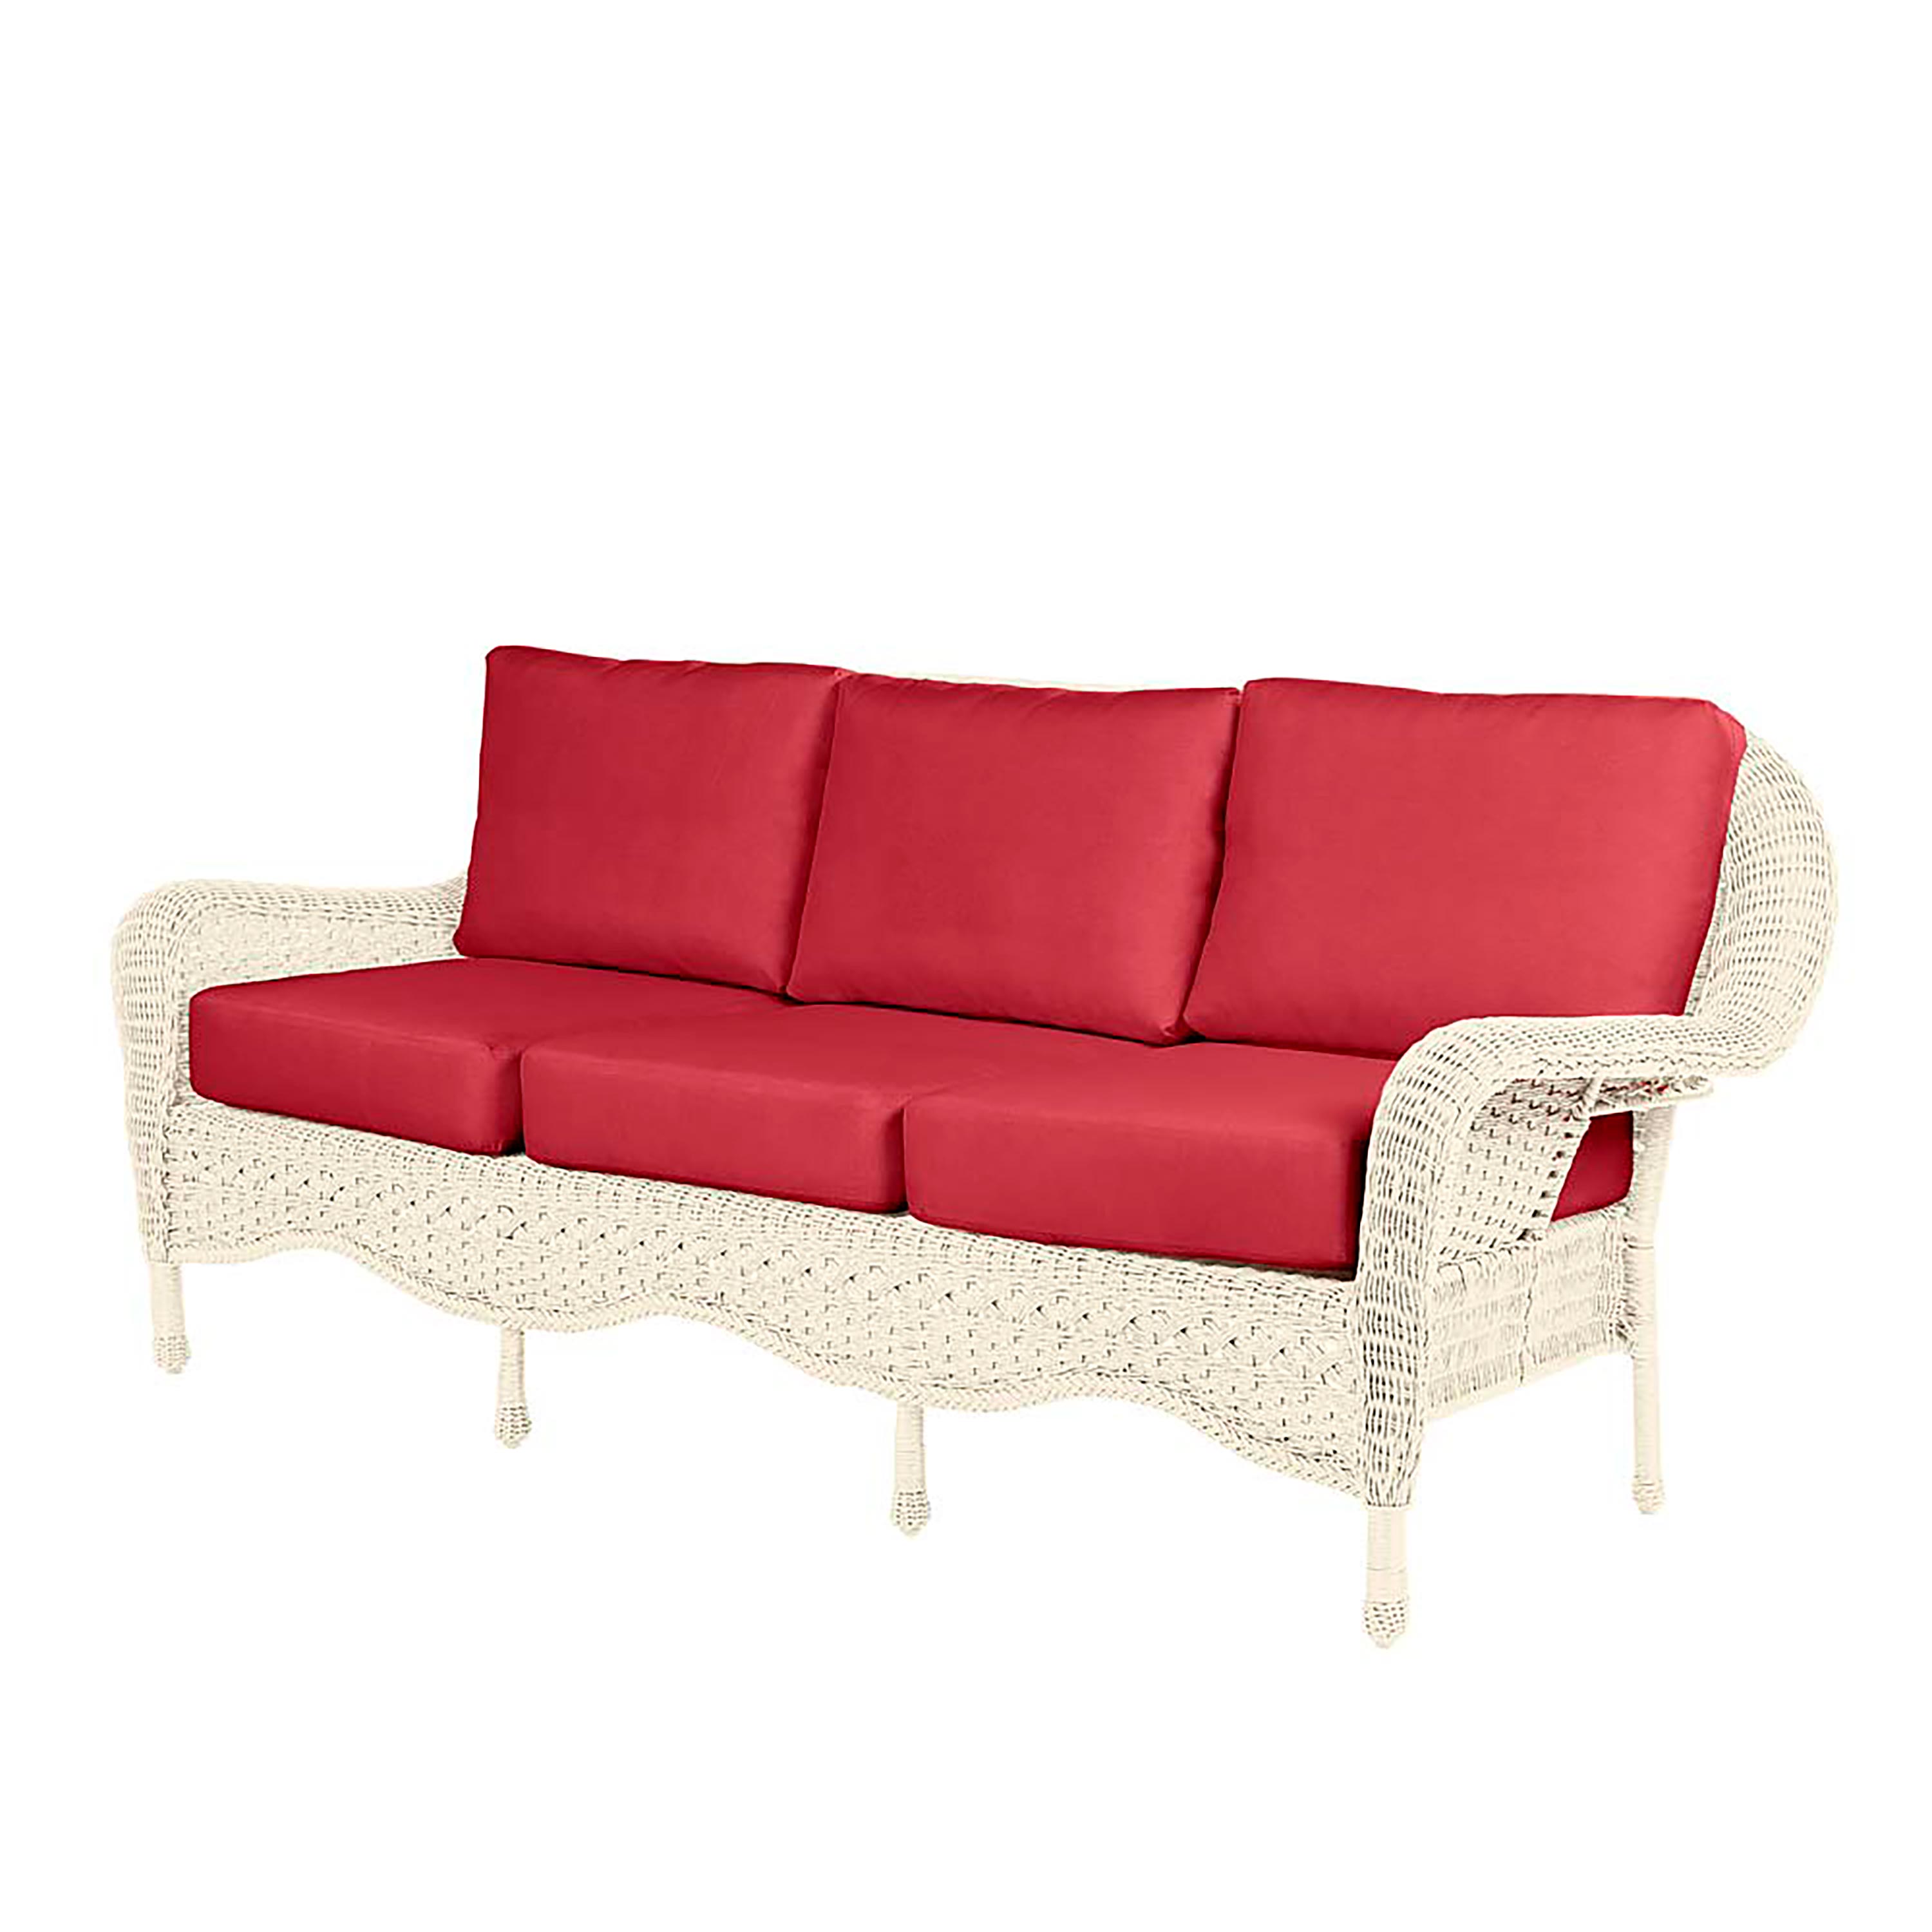 Cloud White with Barn Red Cushions